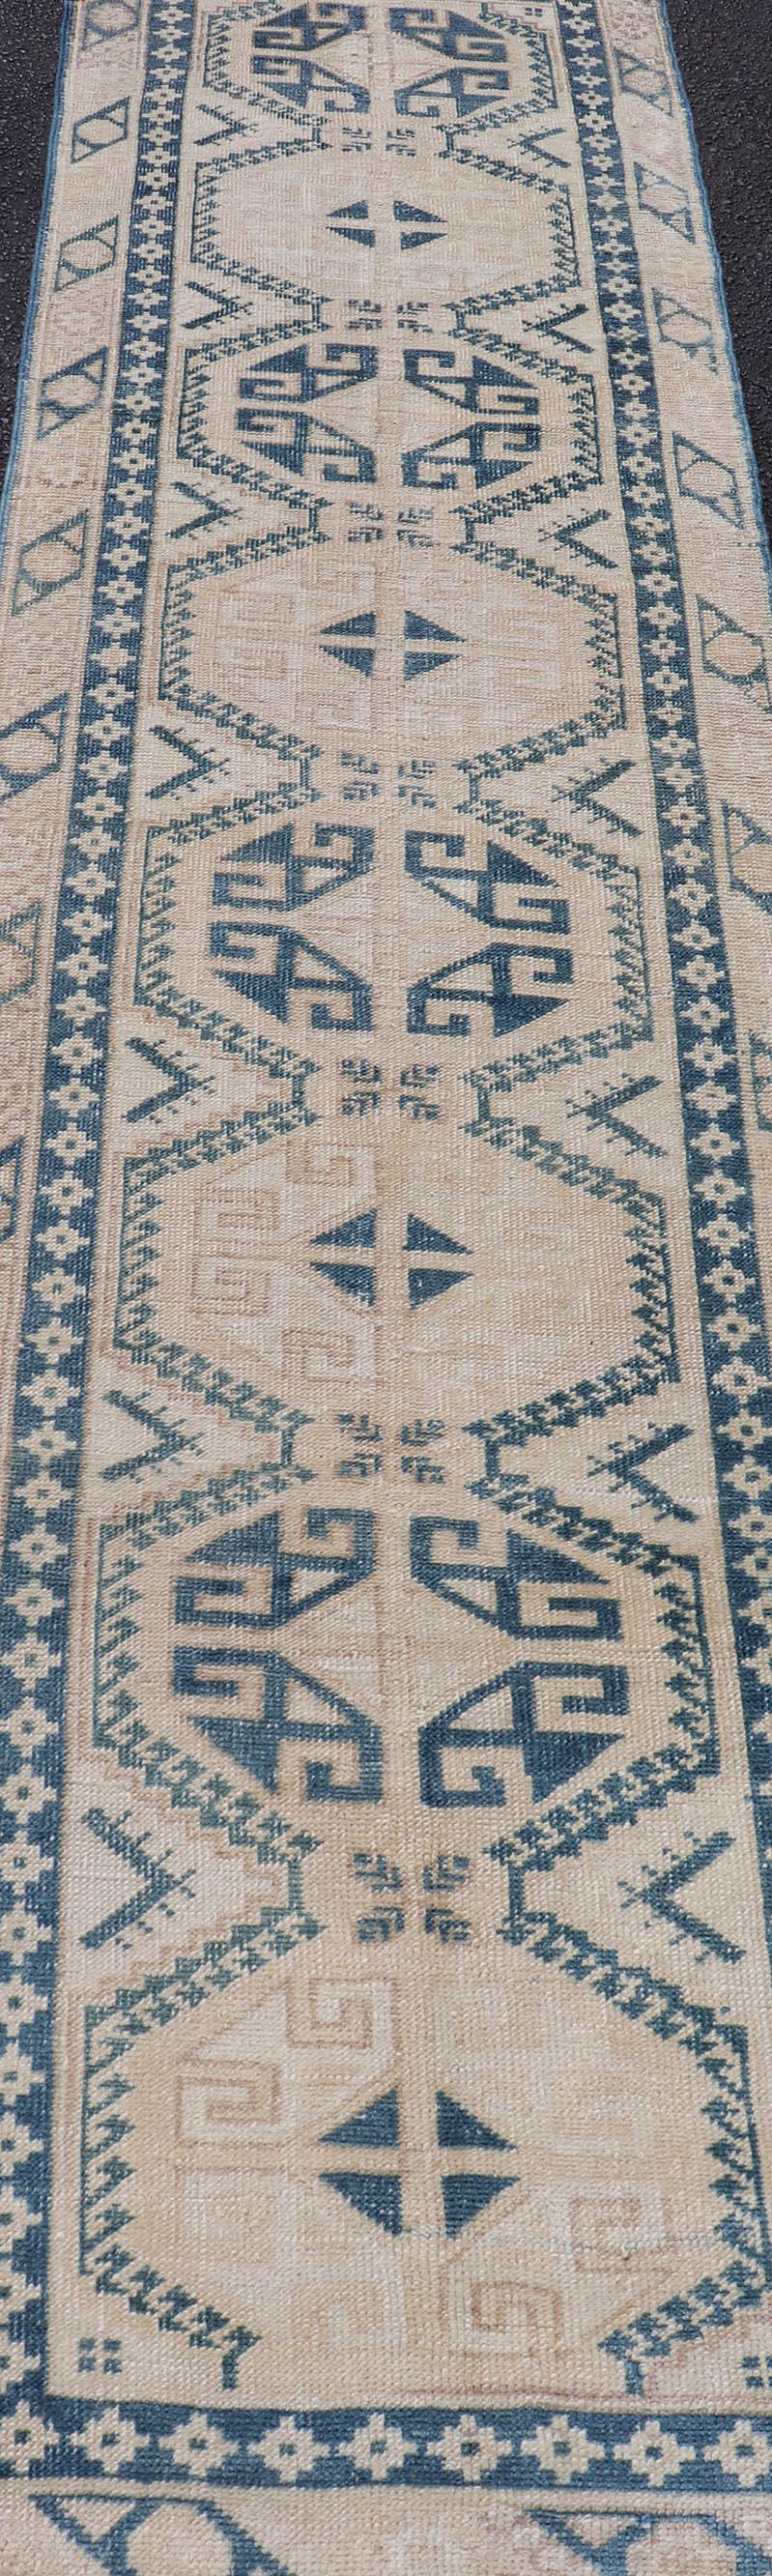 Vintage Oushak Turkish Runner with Geometric Design in Navy Blue For Sale 3